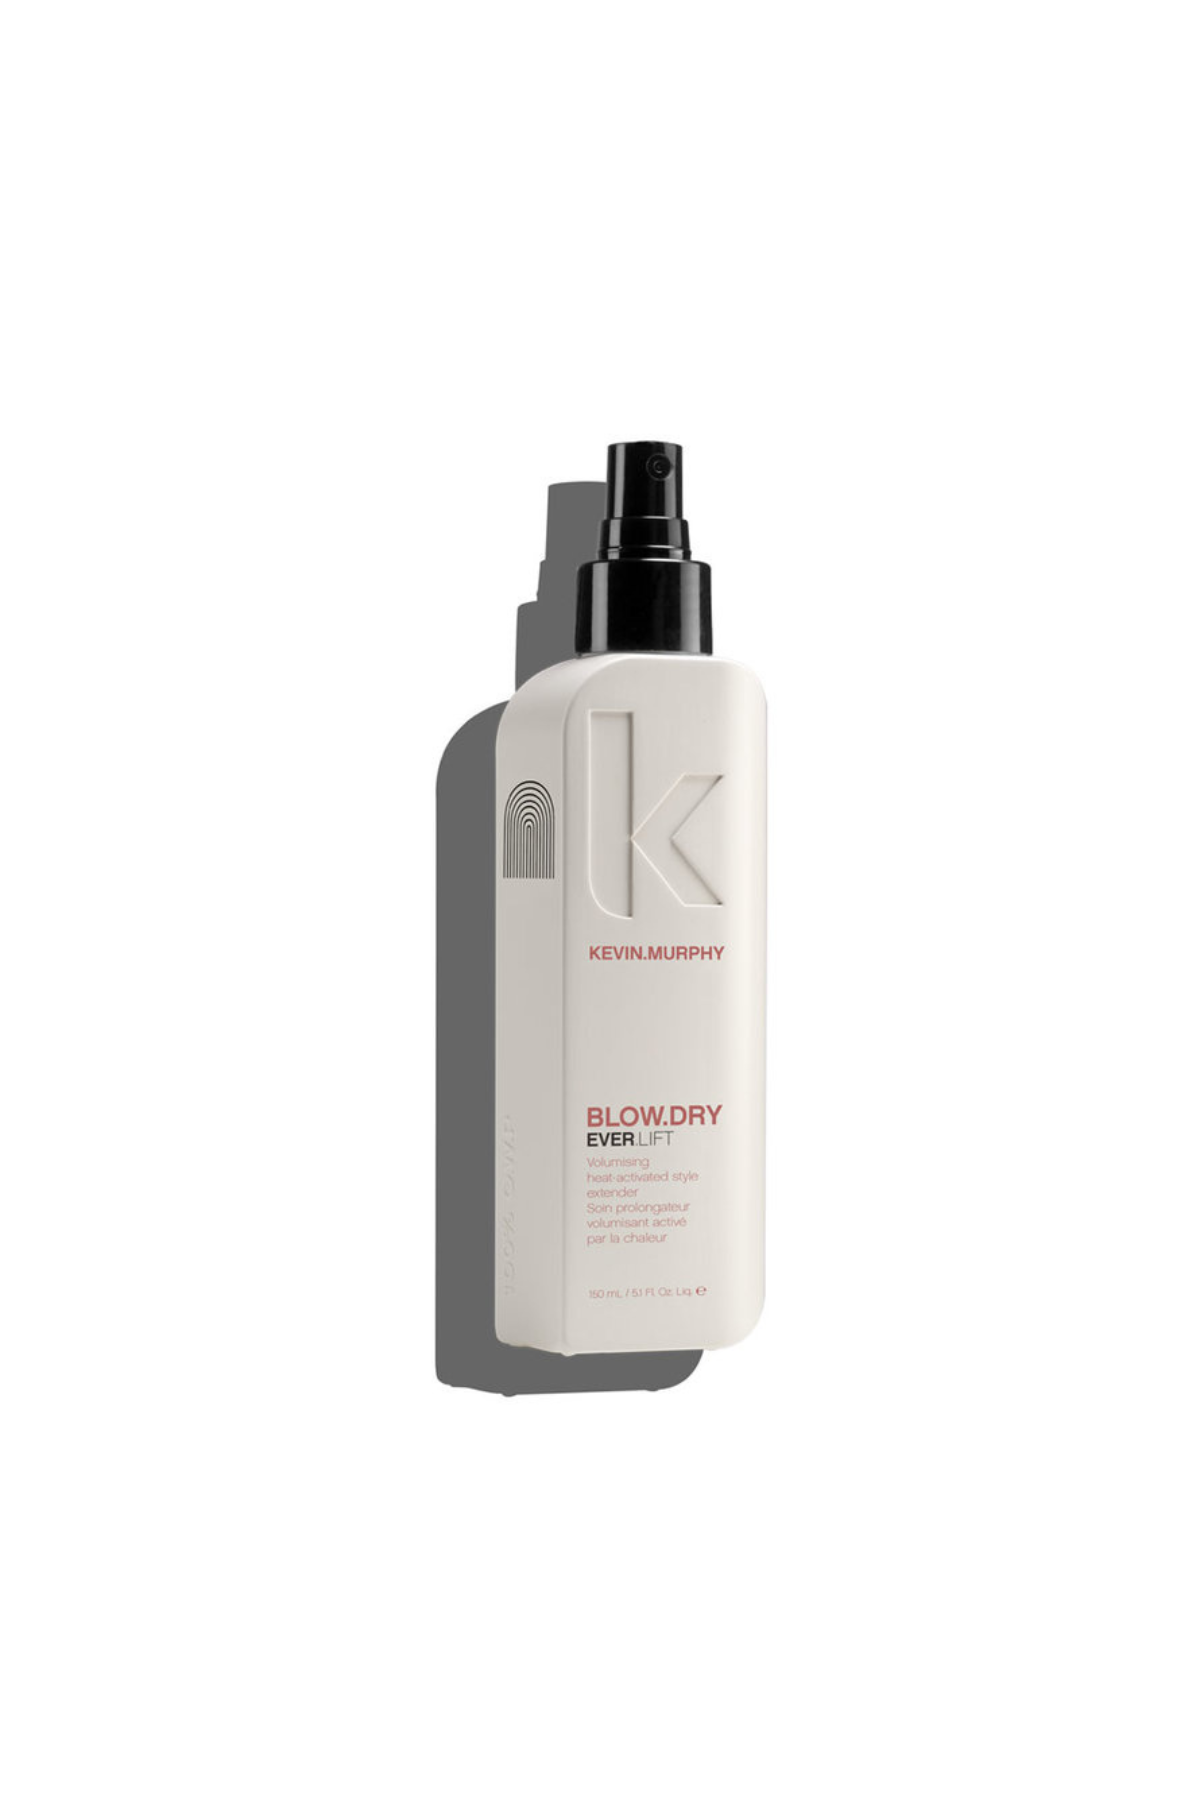 Kevin Murphy Blowdry Ever Lift